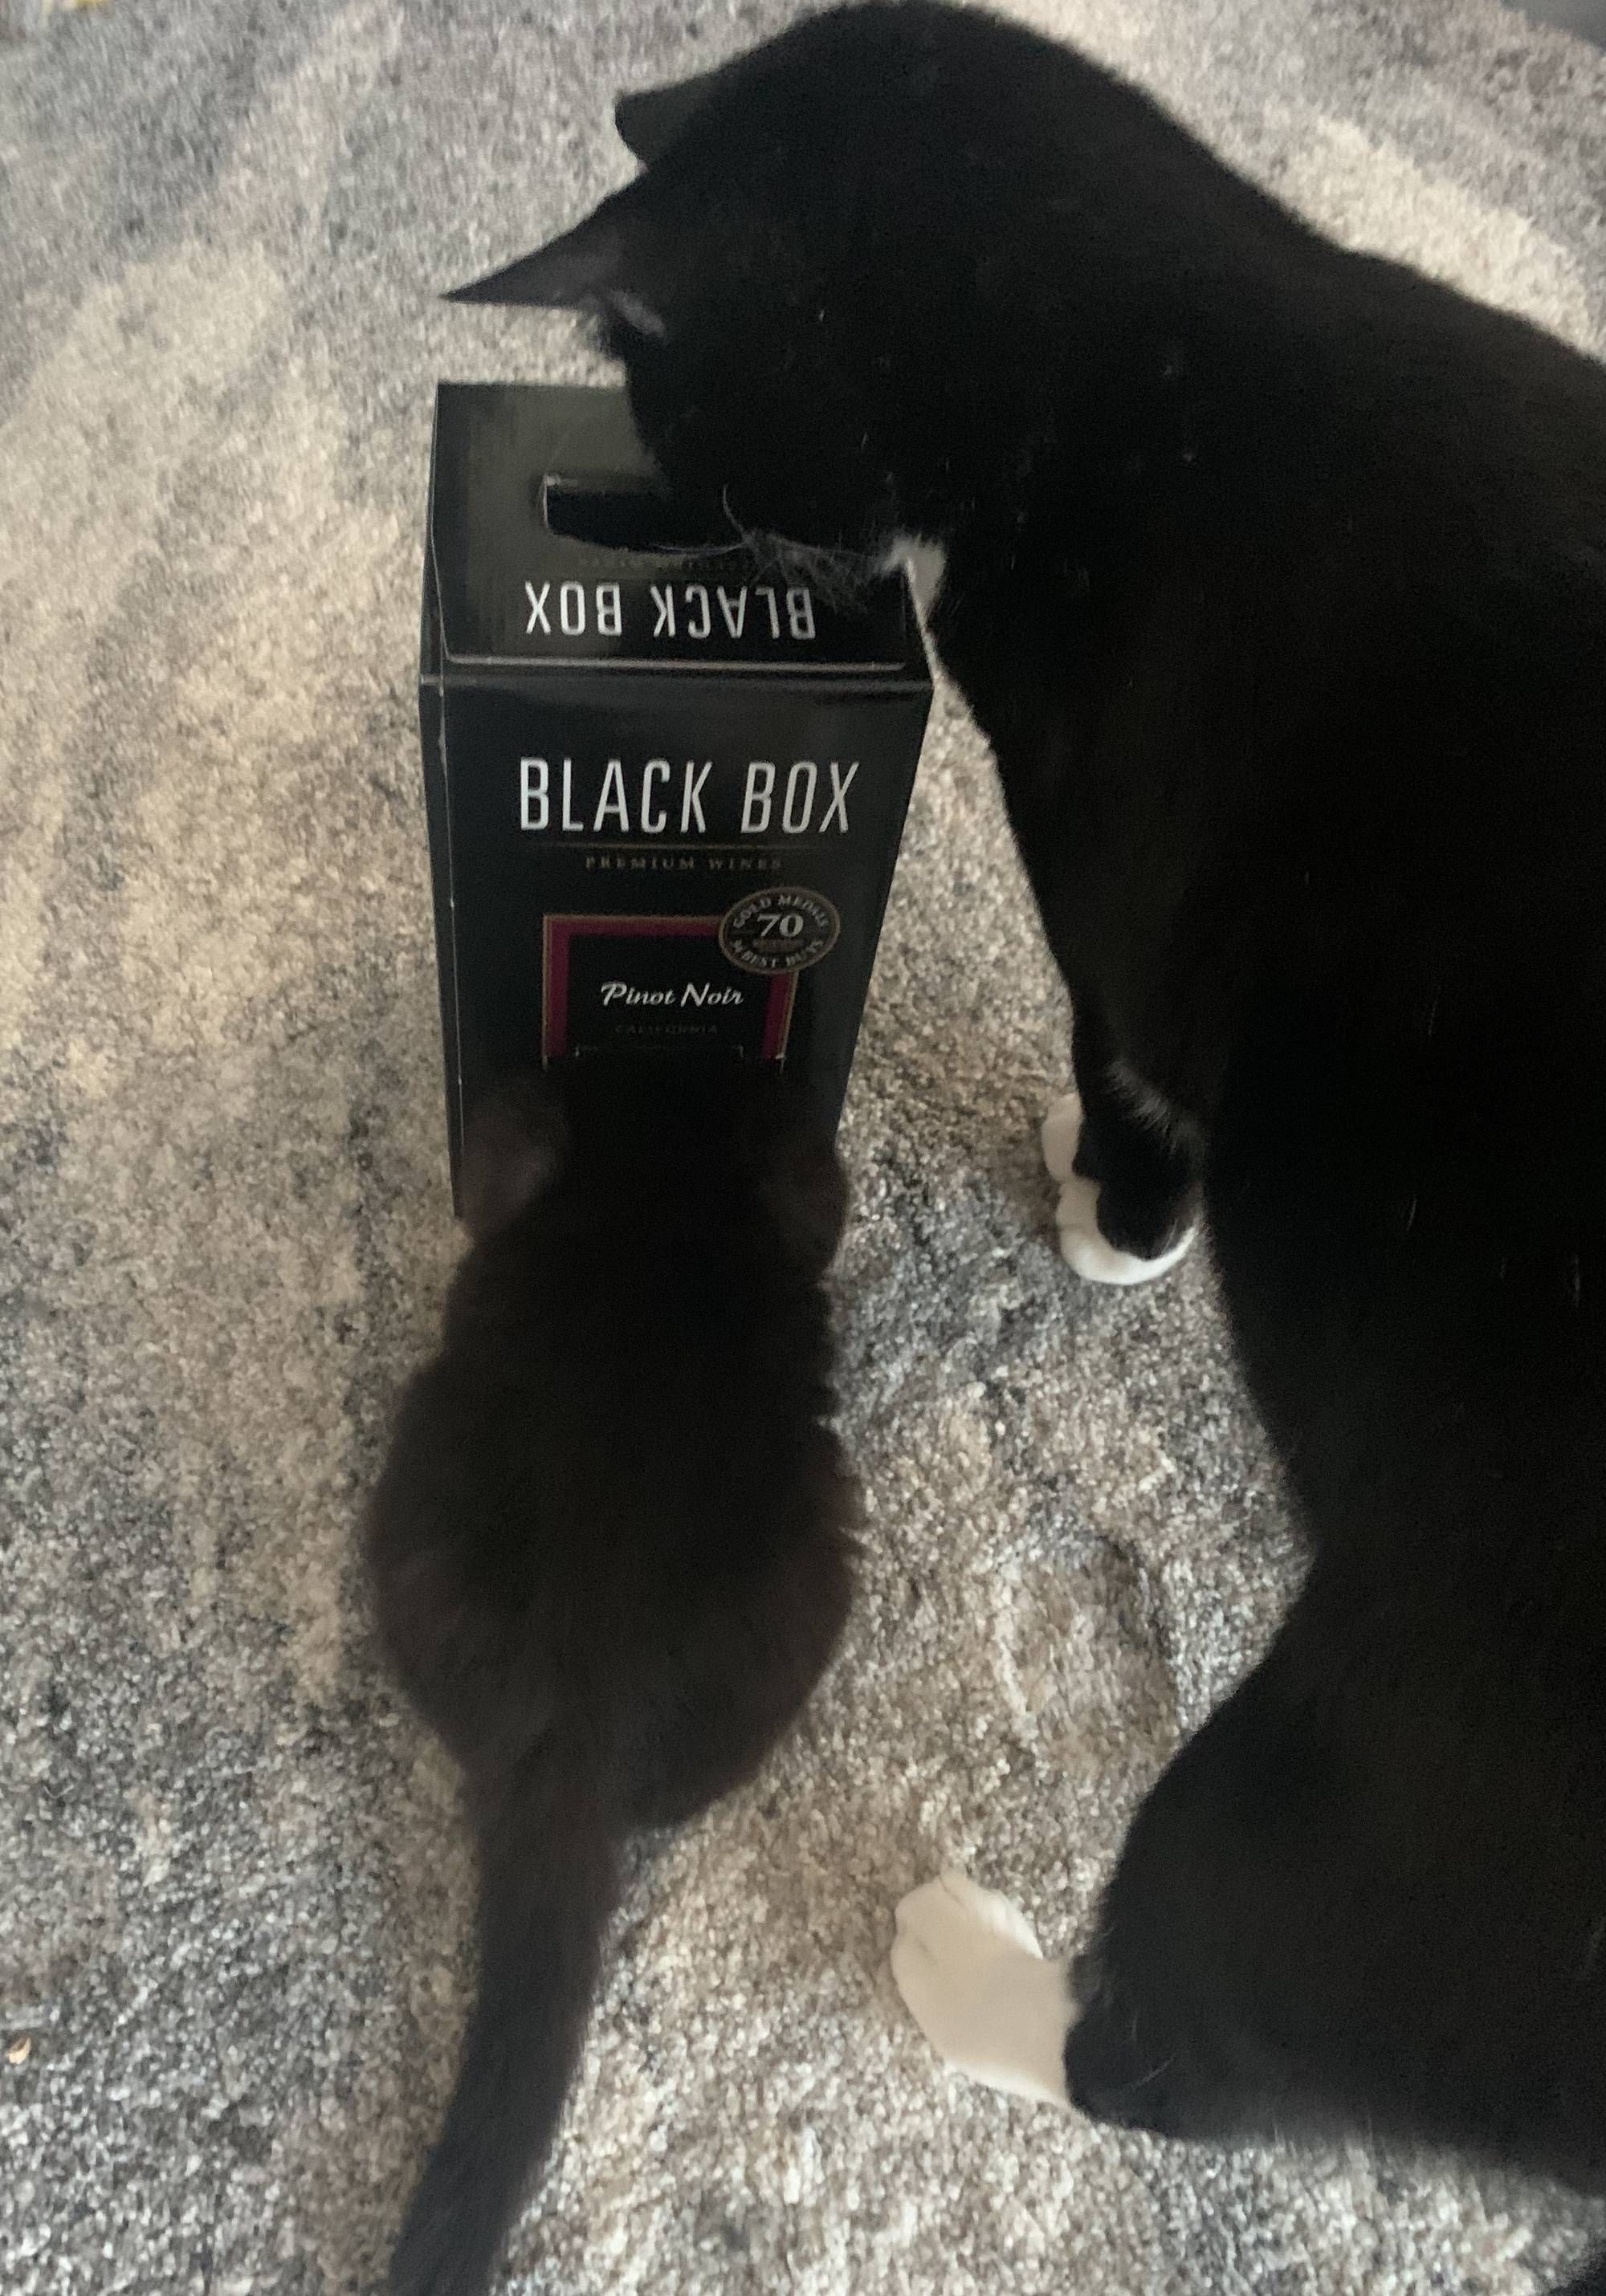 My large cat kept eating my kitten’s food so I hid it inside this empty box of wine. Success!